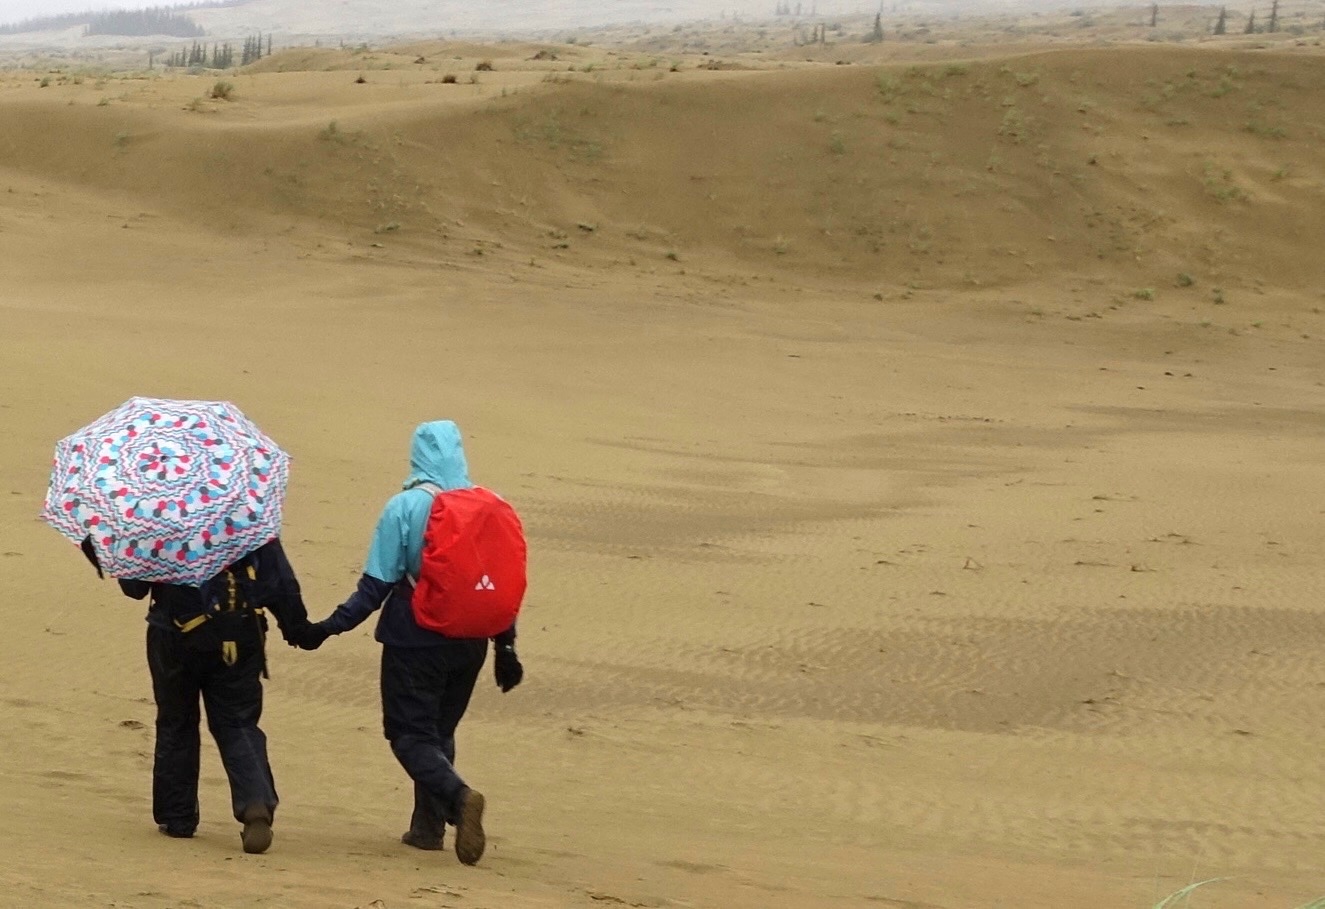 Two women, one carrying an umbrella, walk on sand dunes.